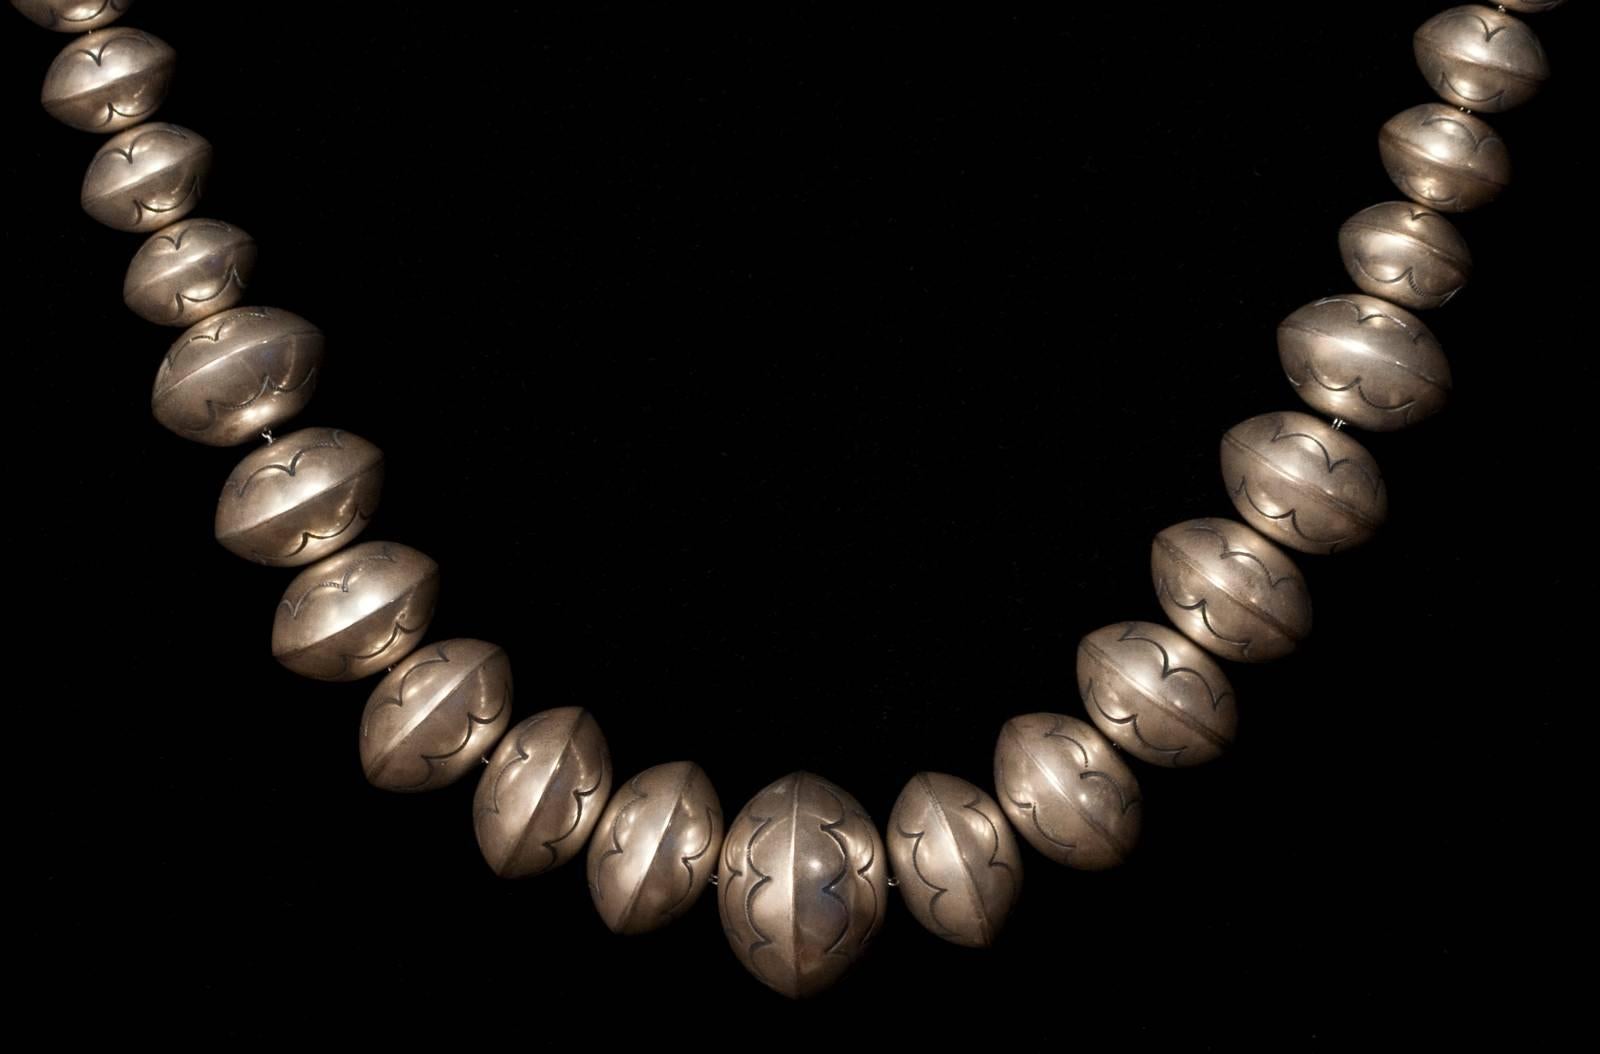 Offered by Zena Kruzick
Mid-20th century Navajo silver pearl necklace.

This long, elegant graduated pearl necklace is strung on a silver chain. There is a small round disk at the clasp with the initials L Y chased in script, possibly Louise or